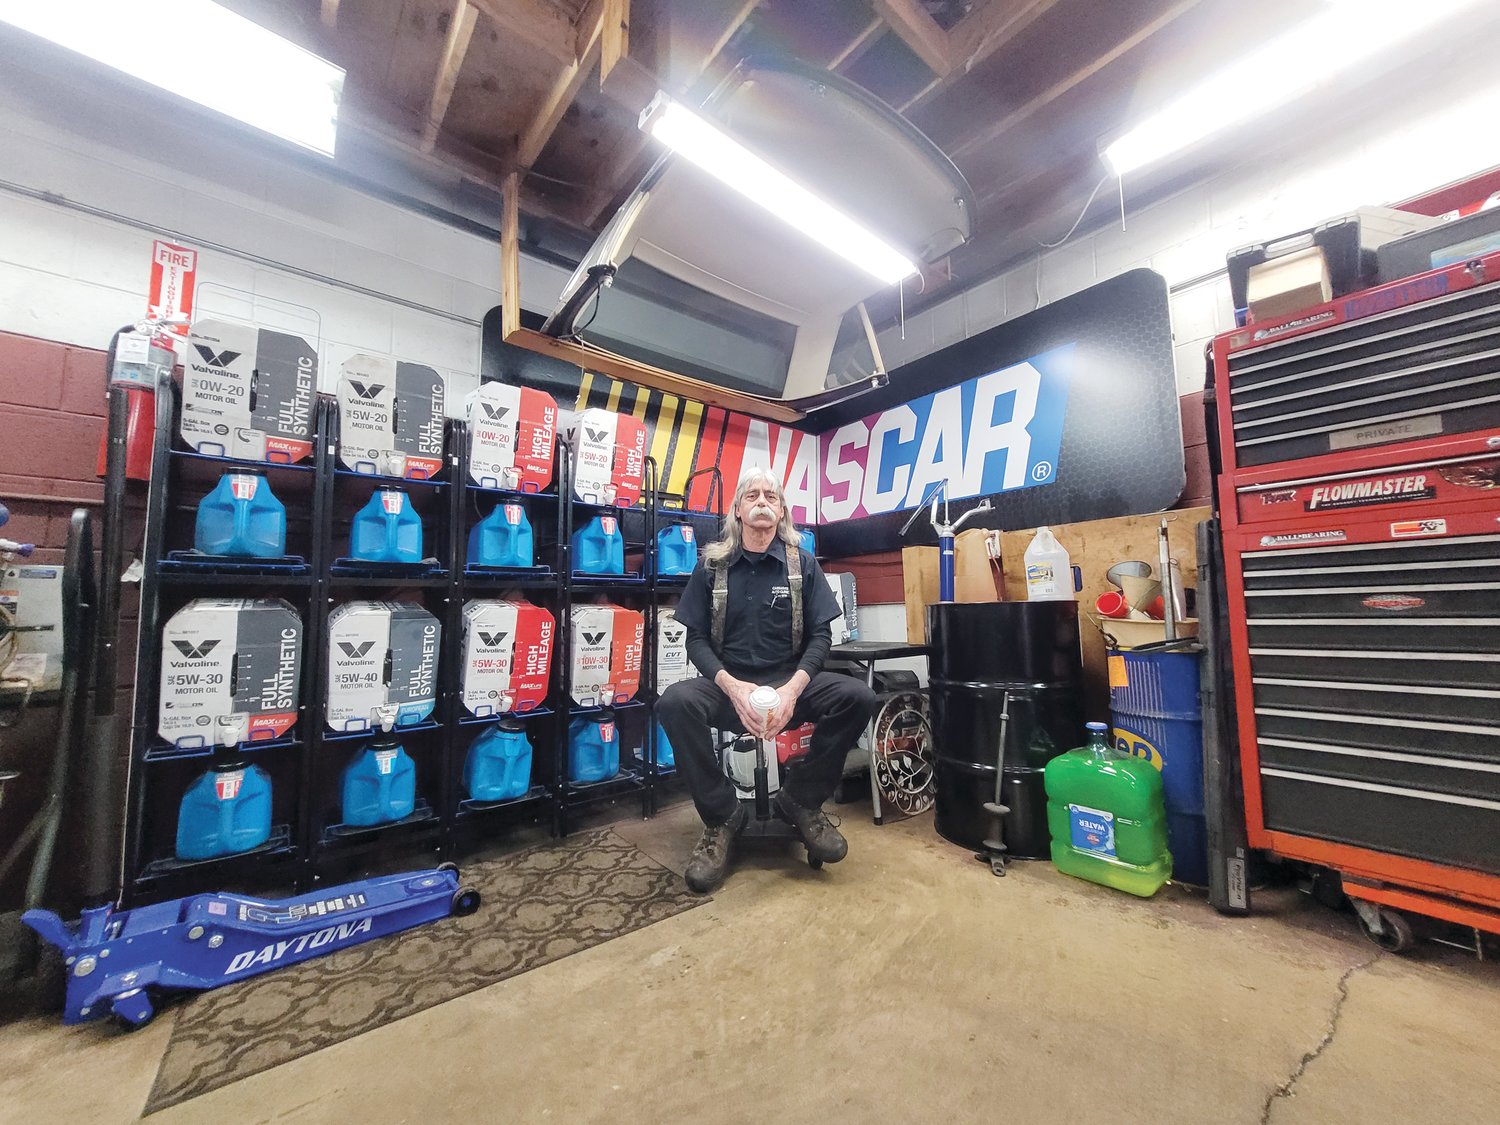 TAKING A BREAK: Dave Carrara has owned and operated Carrara’s Auto Clinic since 1979. His son won’t be taking over and Carrara has decided to close up shop.